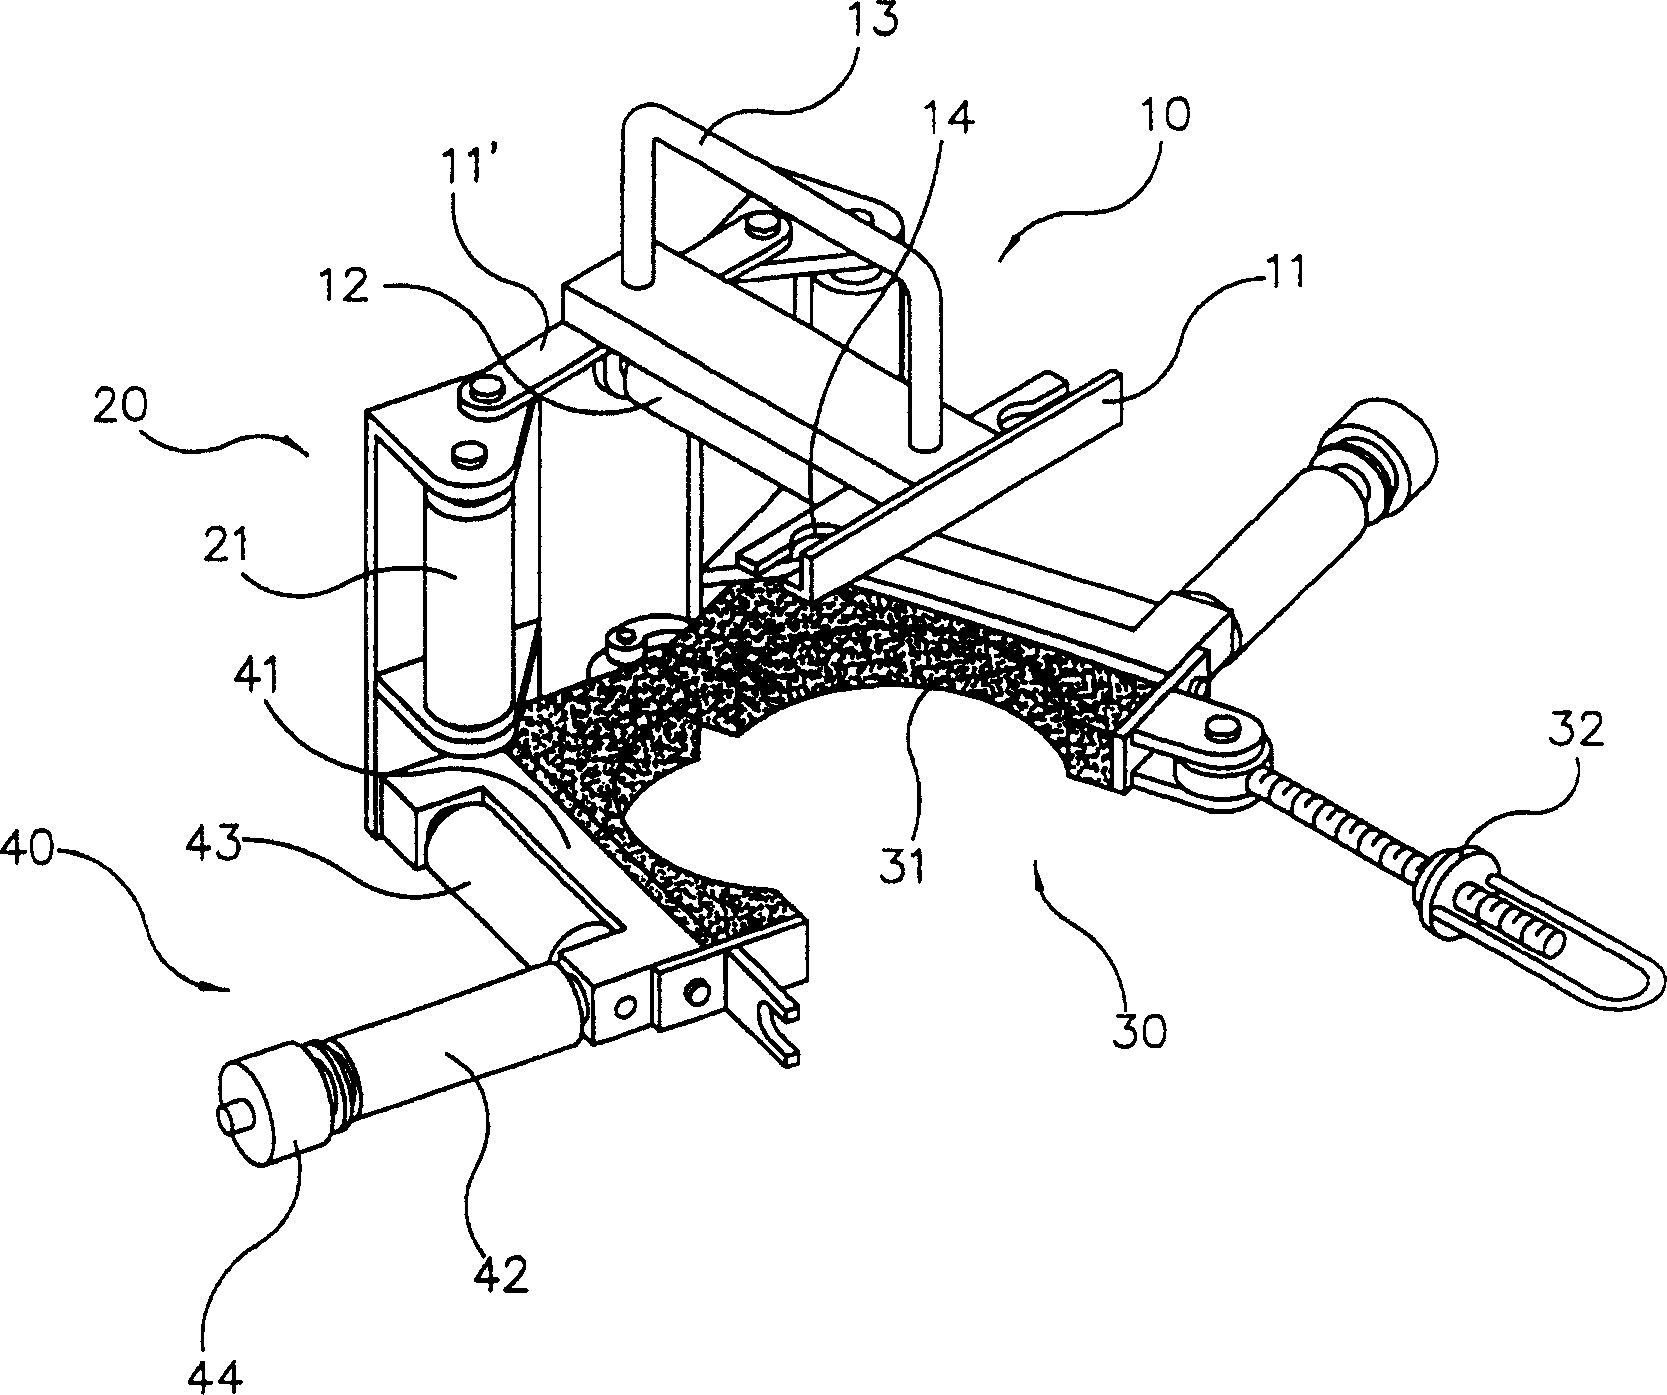 Electric wire removing roller for LP insulator and power distribution method of construction